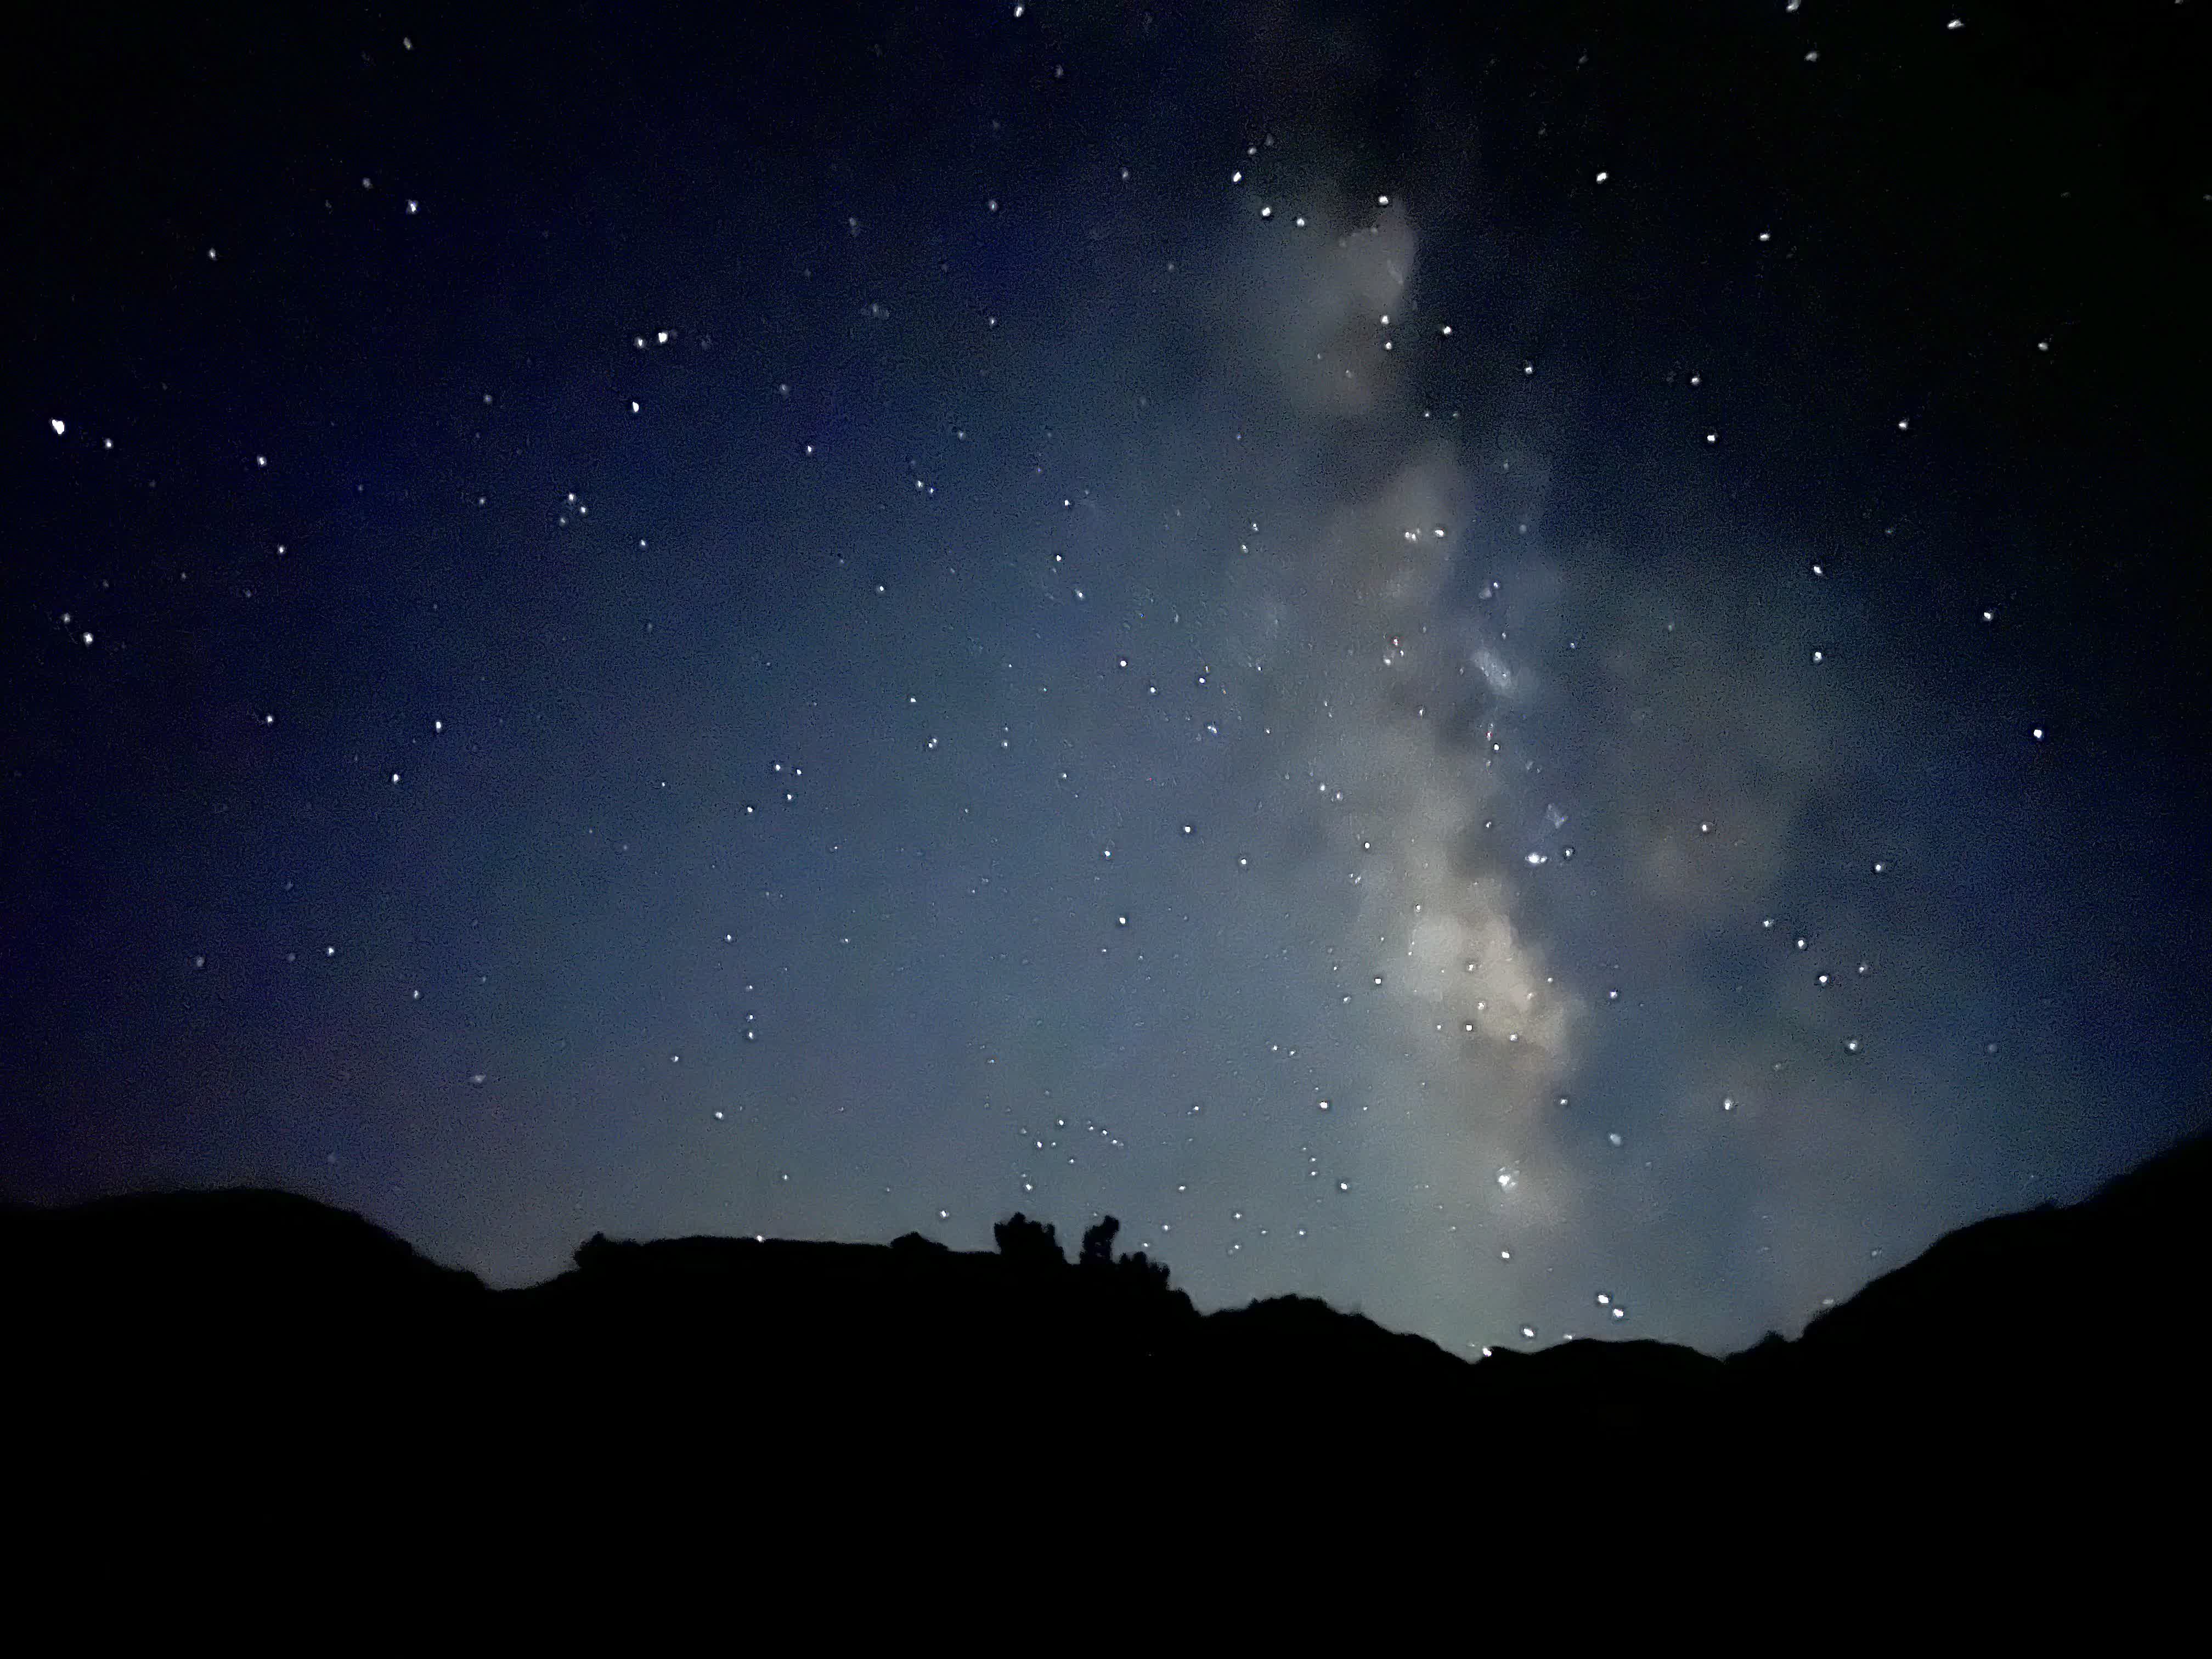 The Milky Way from a camping trip in the eastern Sierras